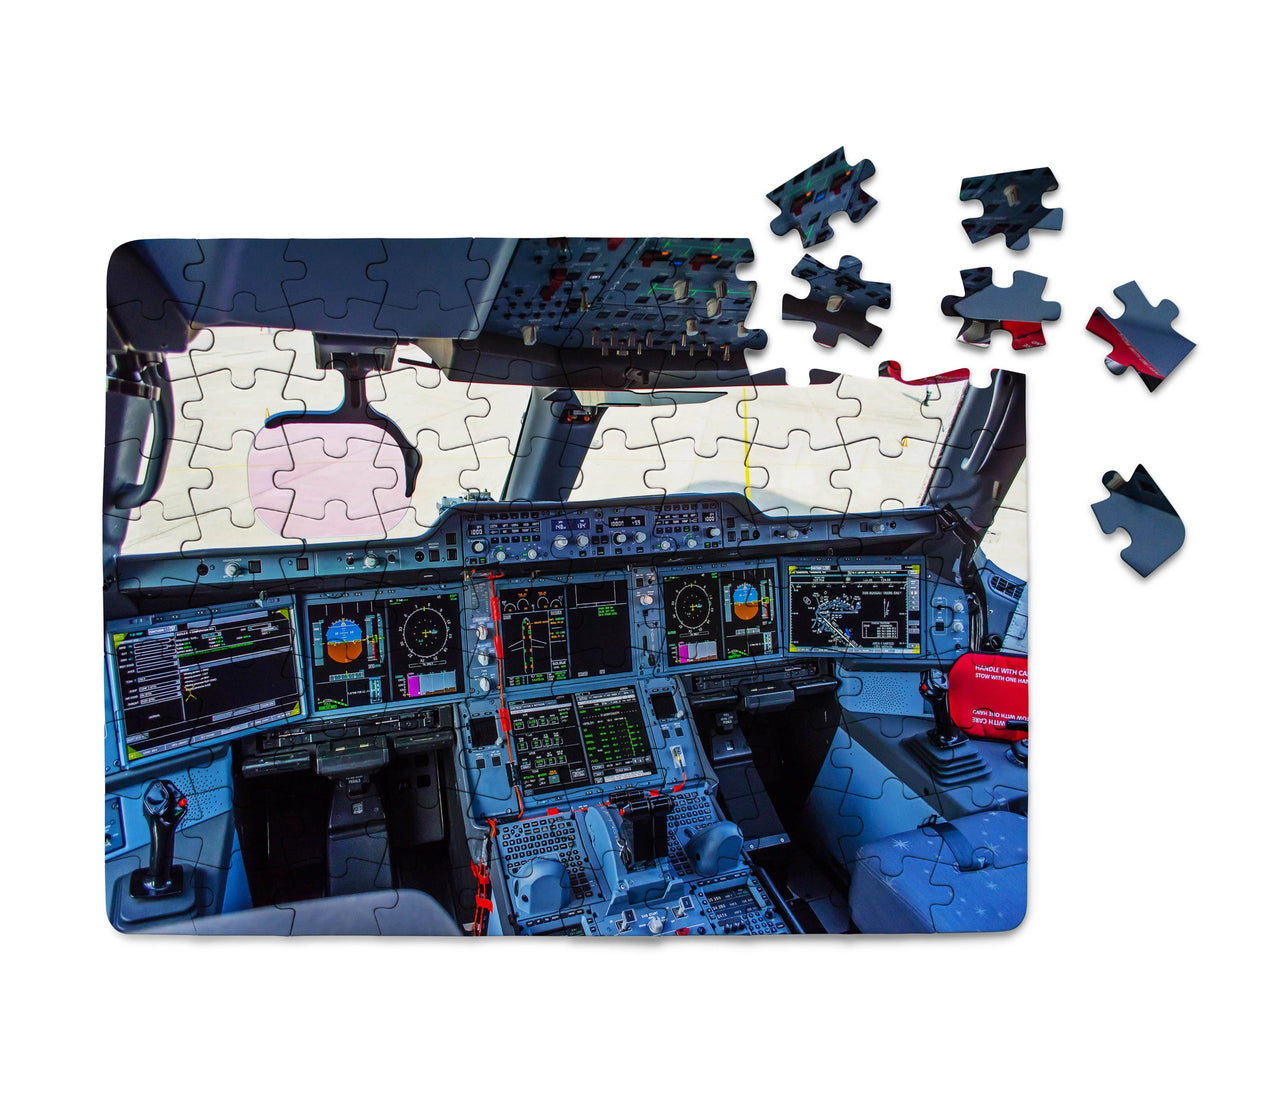 Airbus A350 Cockpit Printed Puzzles Aviation Shop 